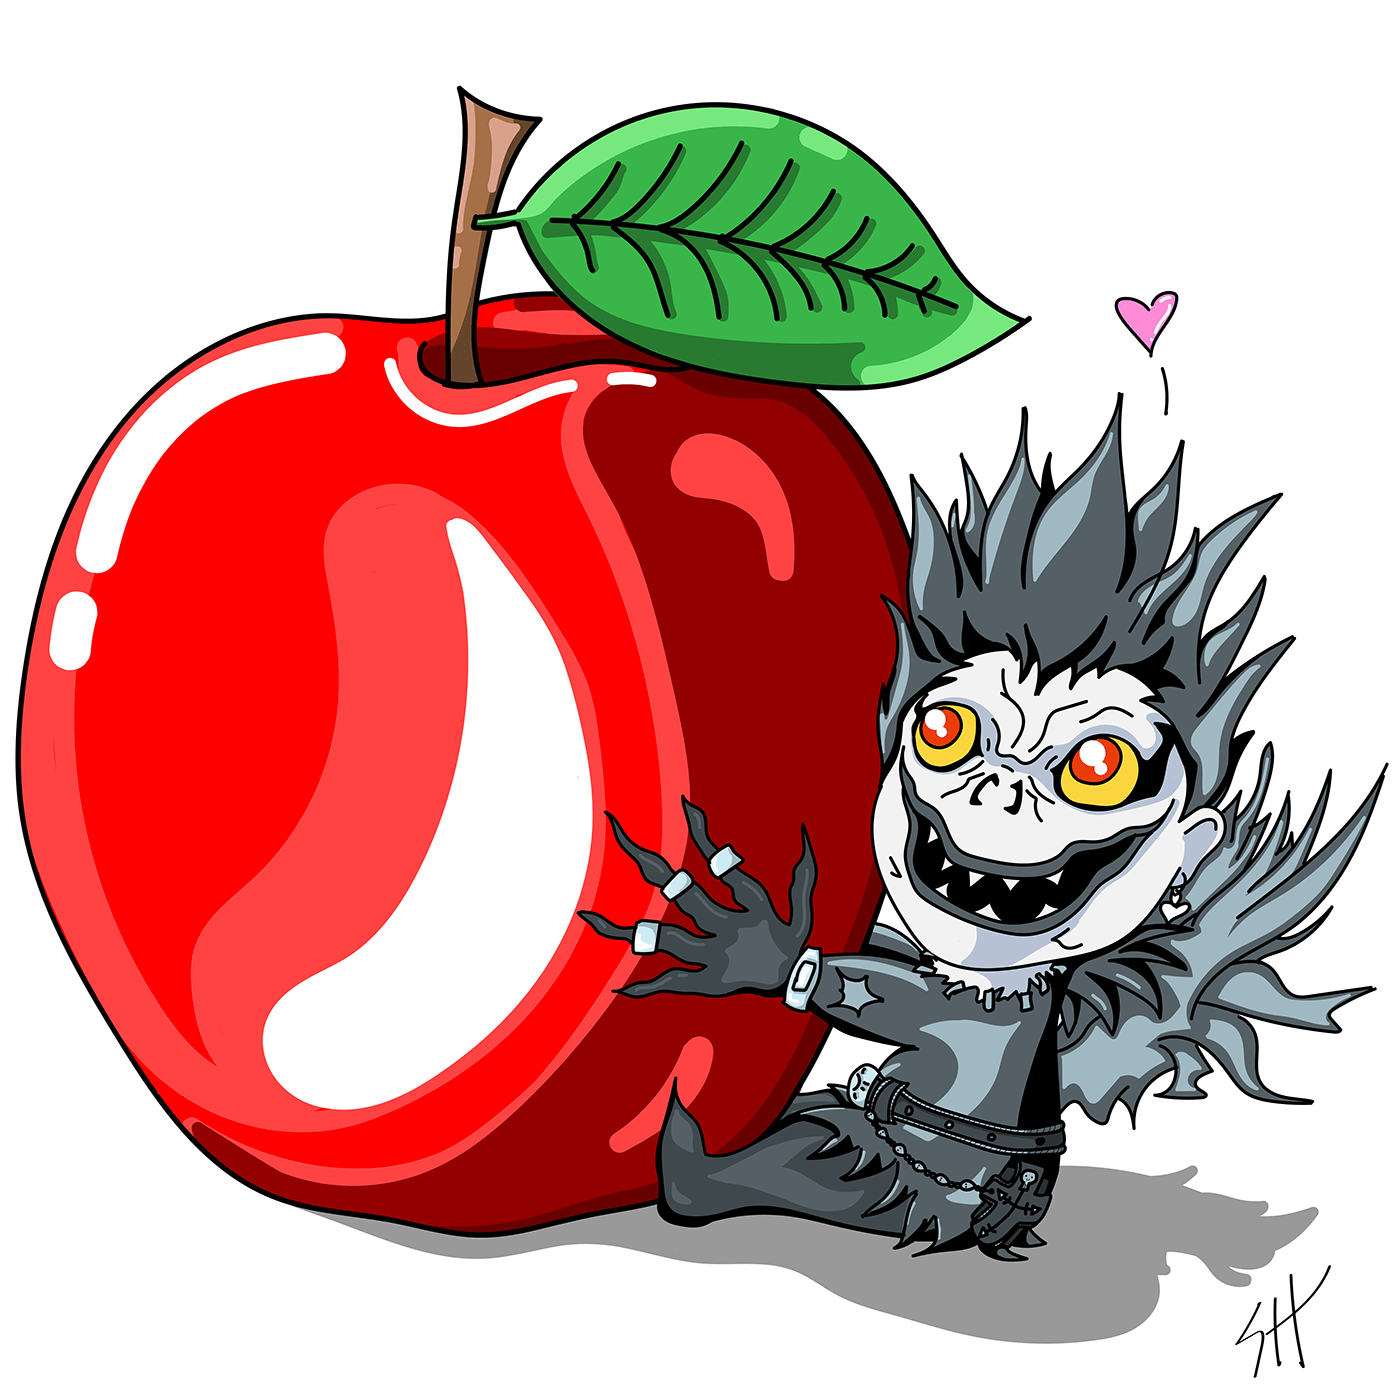 A tiny Ryuk looks up at an apple in this worked inspired by the anime &apos...